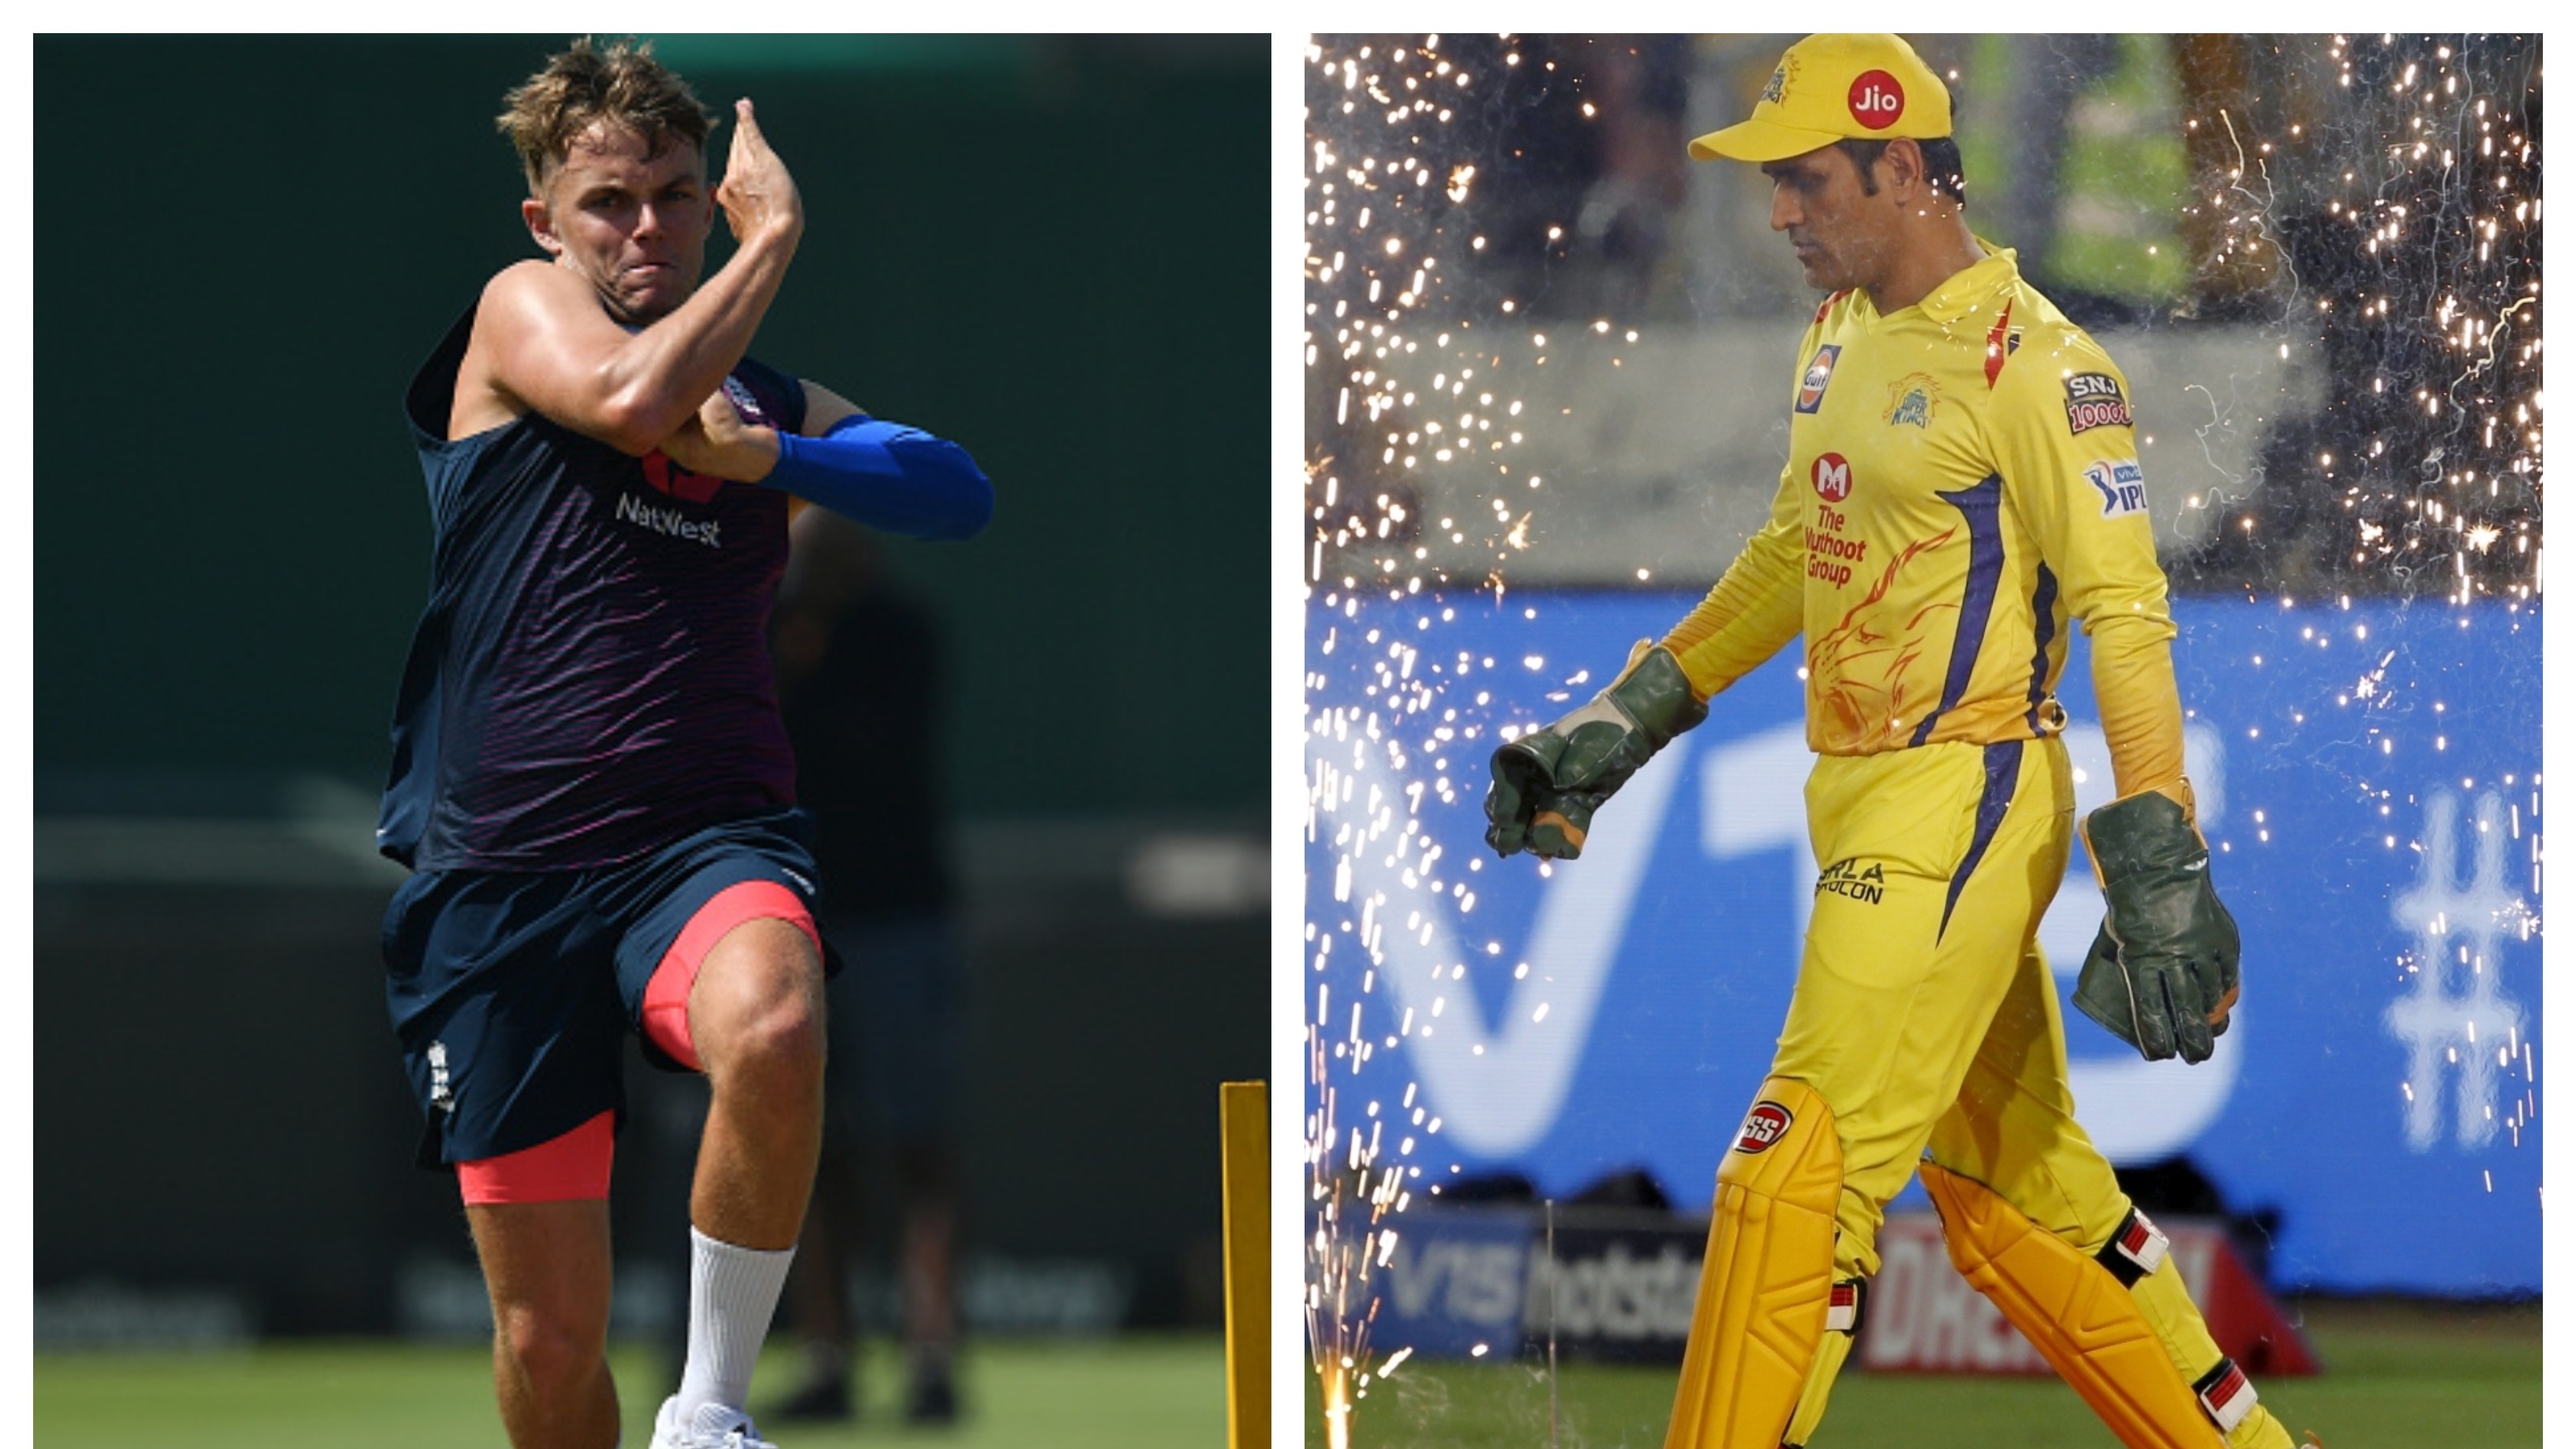 IPL 2020: Sam Curran eager to play under MS Dhoni's captaincy when normalcy returns 